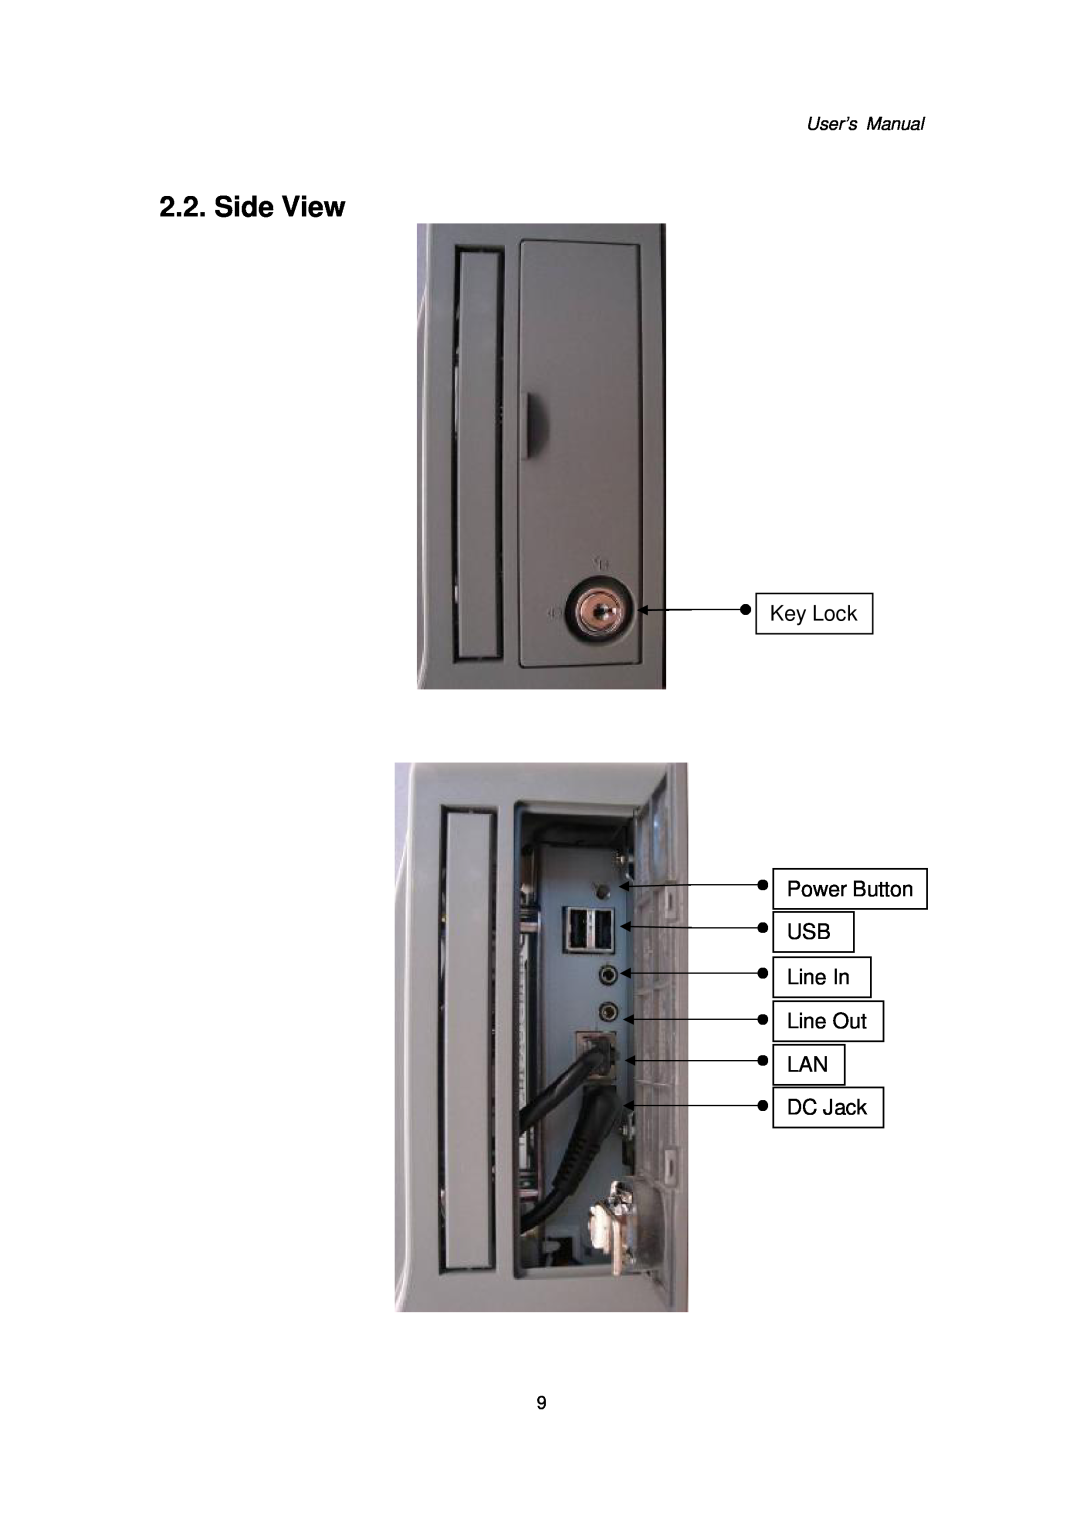 Intel Kiosk Hardware System, 48201201 Side View, Key Lock Power Button USB Line In Line Out LAN, DC Jack, User’s Manual 